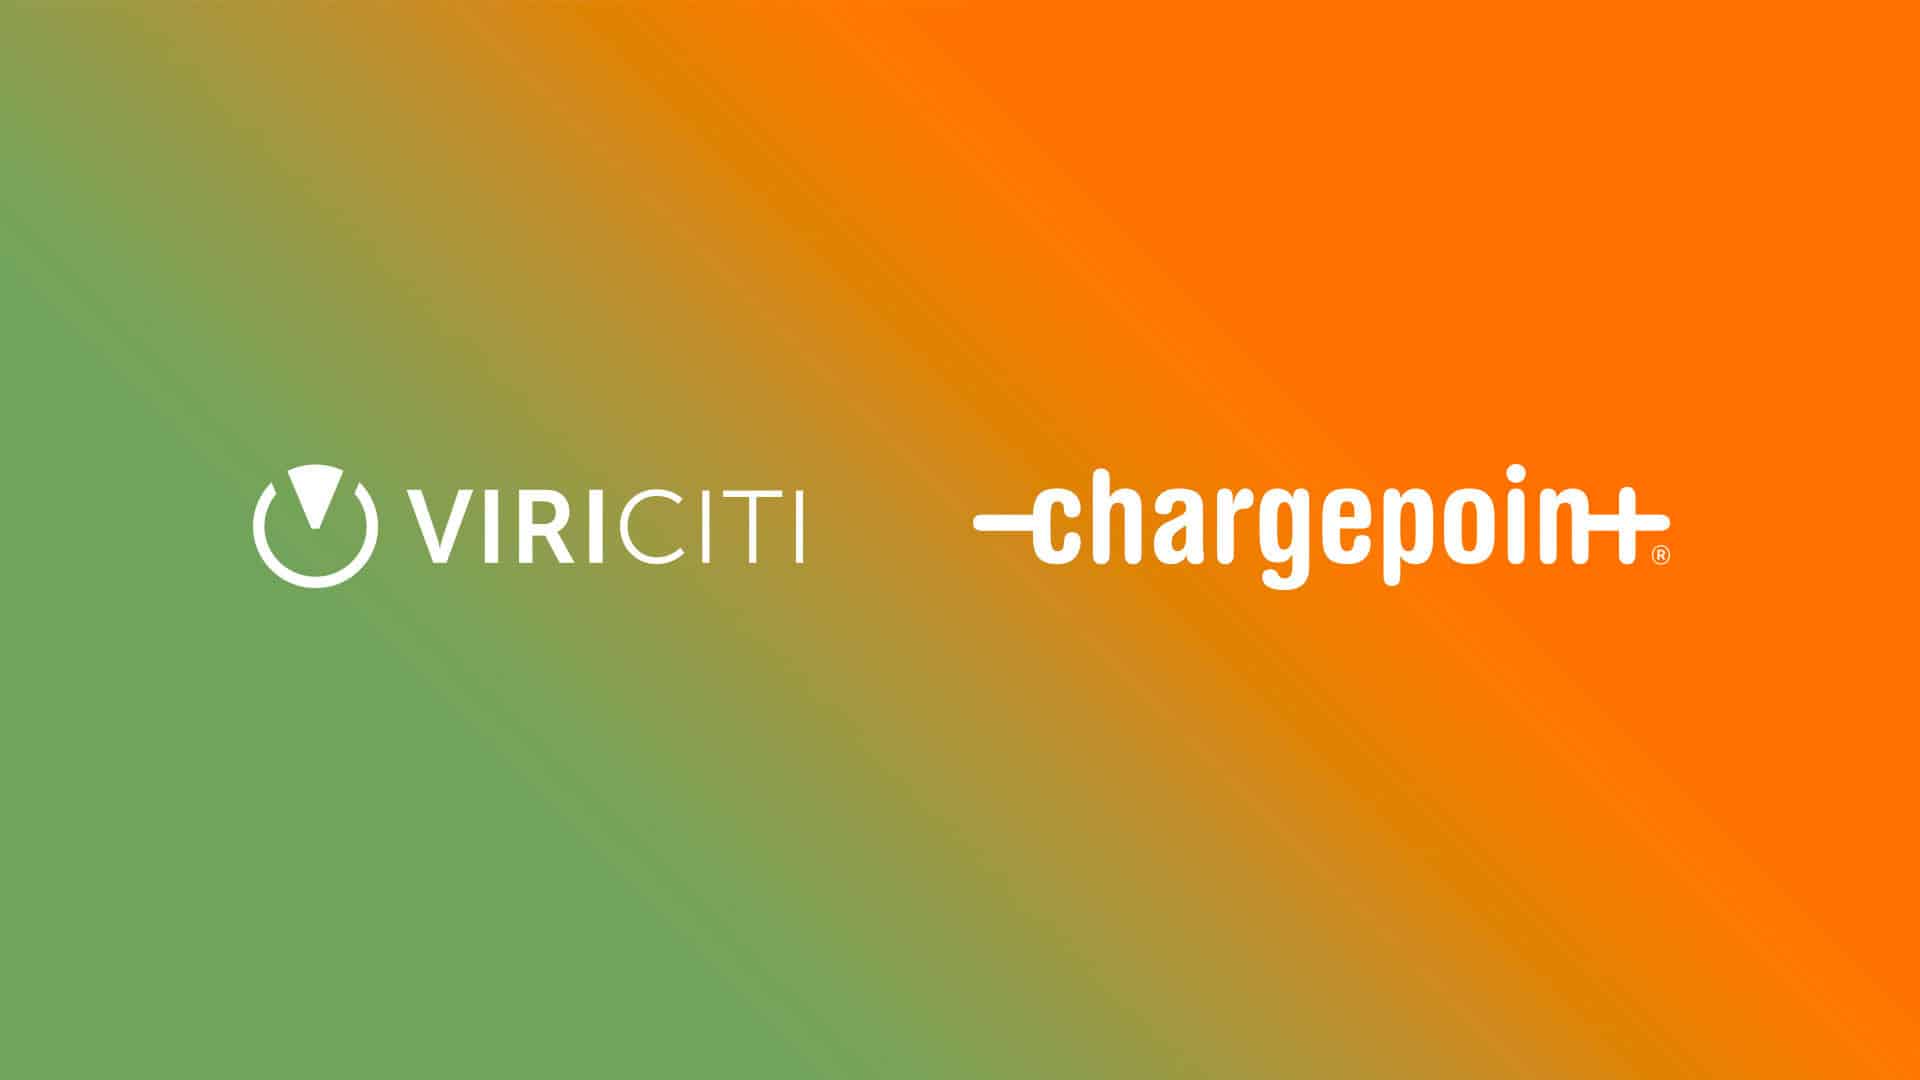 ChargePoint acquires eBus and commercial vehicle management provider ViriCiti to accelerate fleet electrification